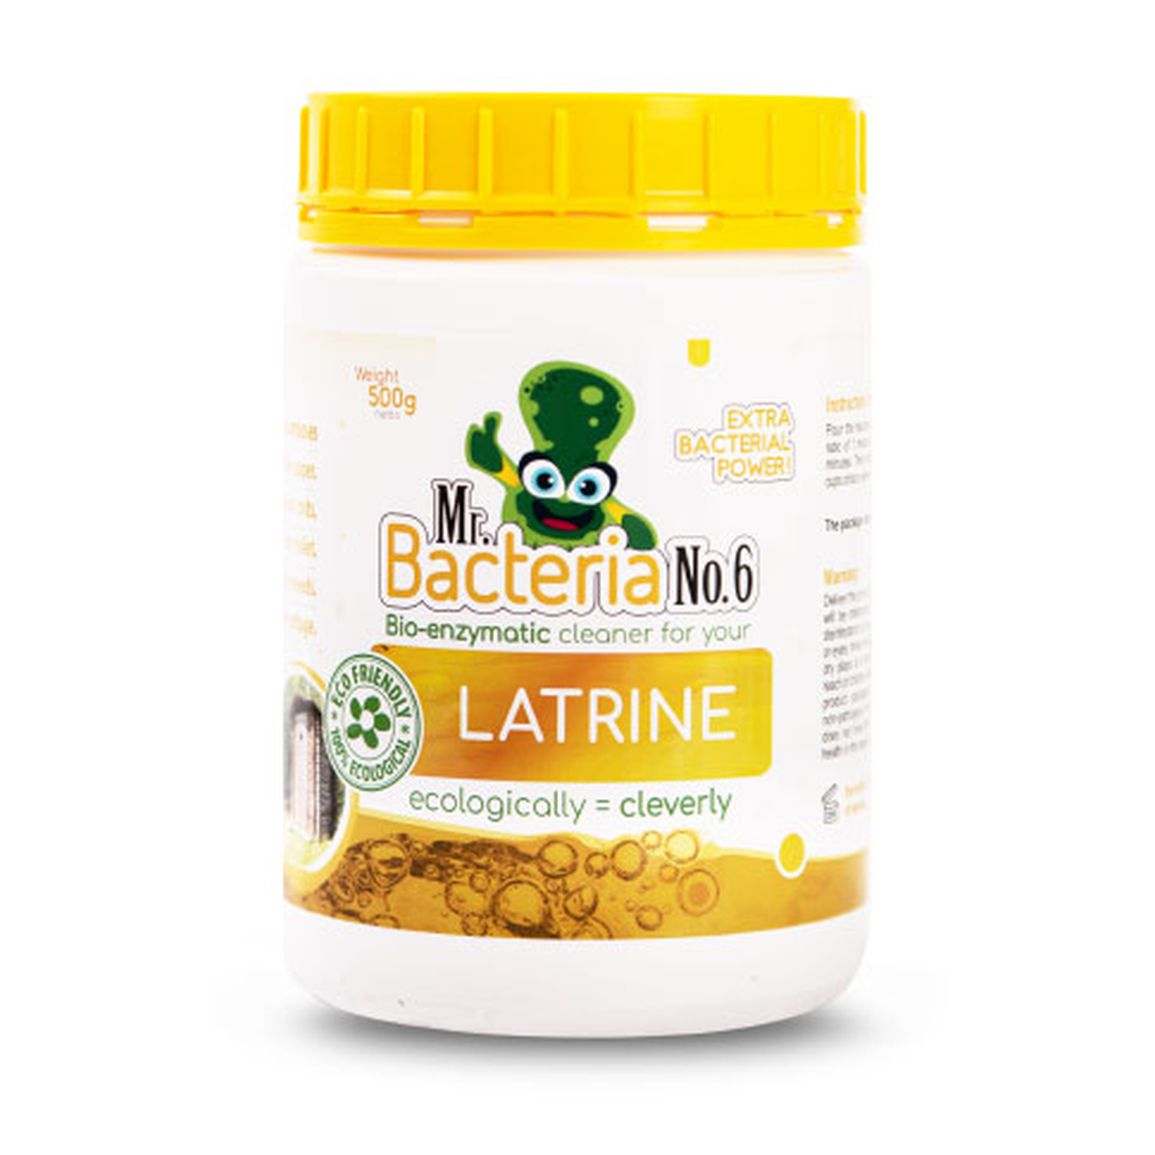 Bio-enzymatic cleaner for your Latrine or Pit Toilet - 500g